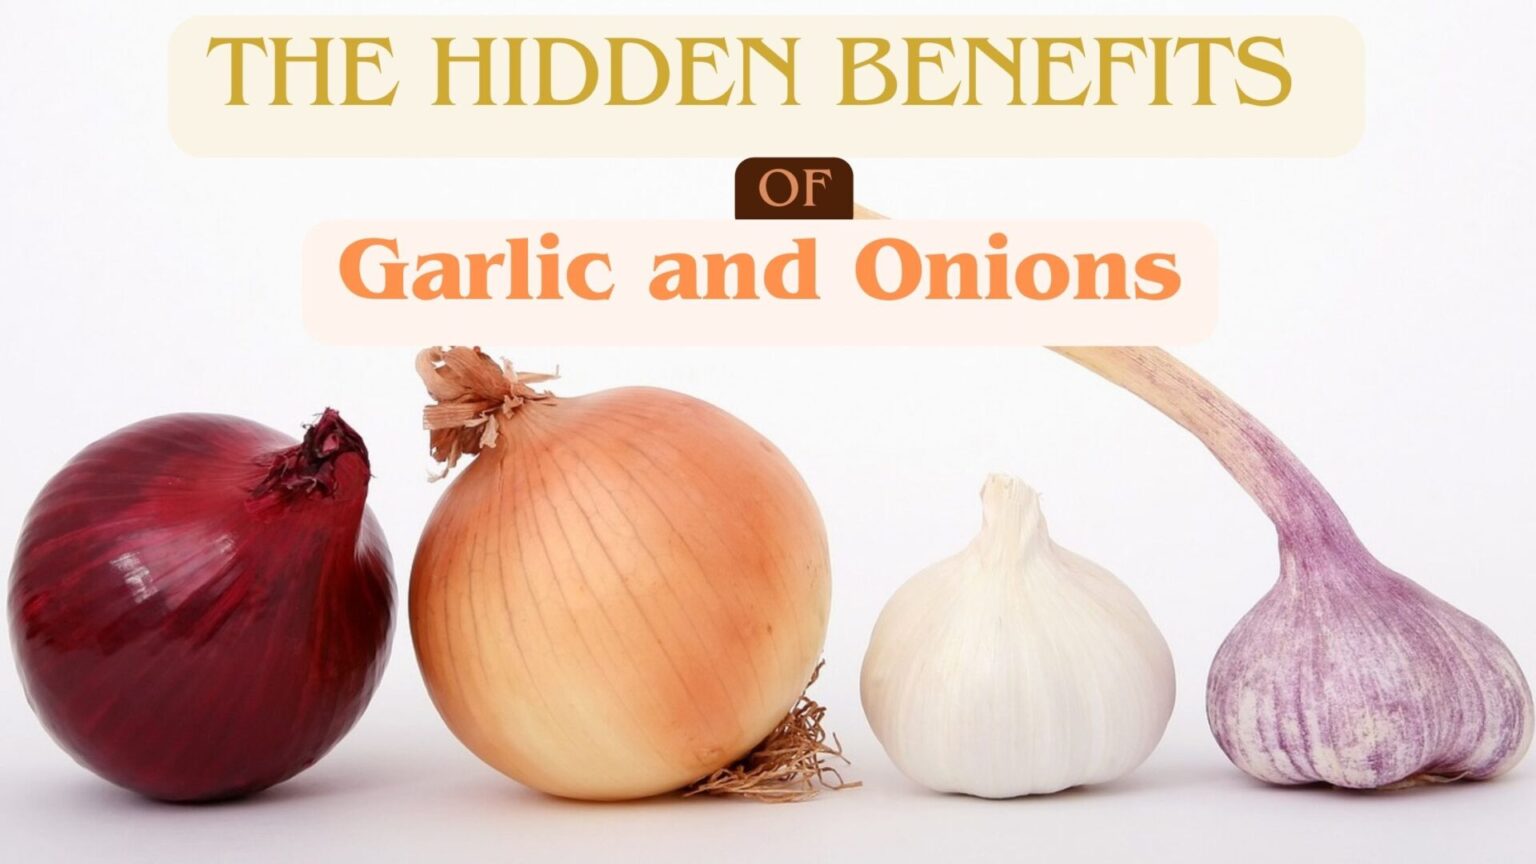 Savoring Health: Unveiling the Hidden Benefits of Garlic and Onions"